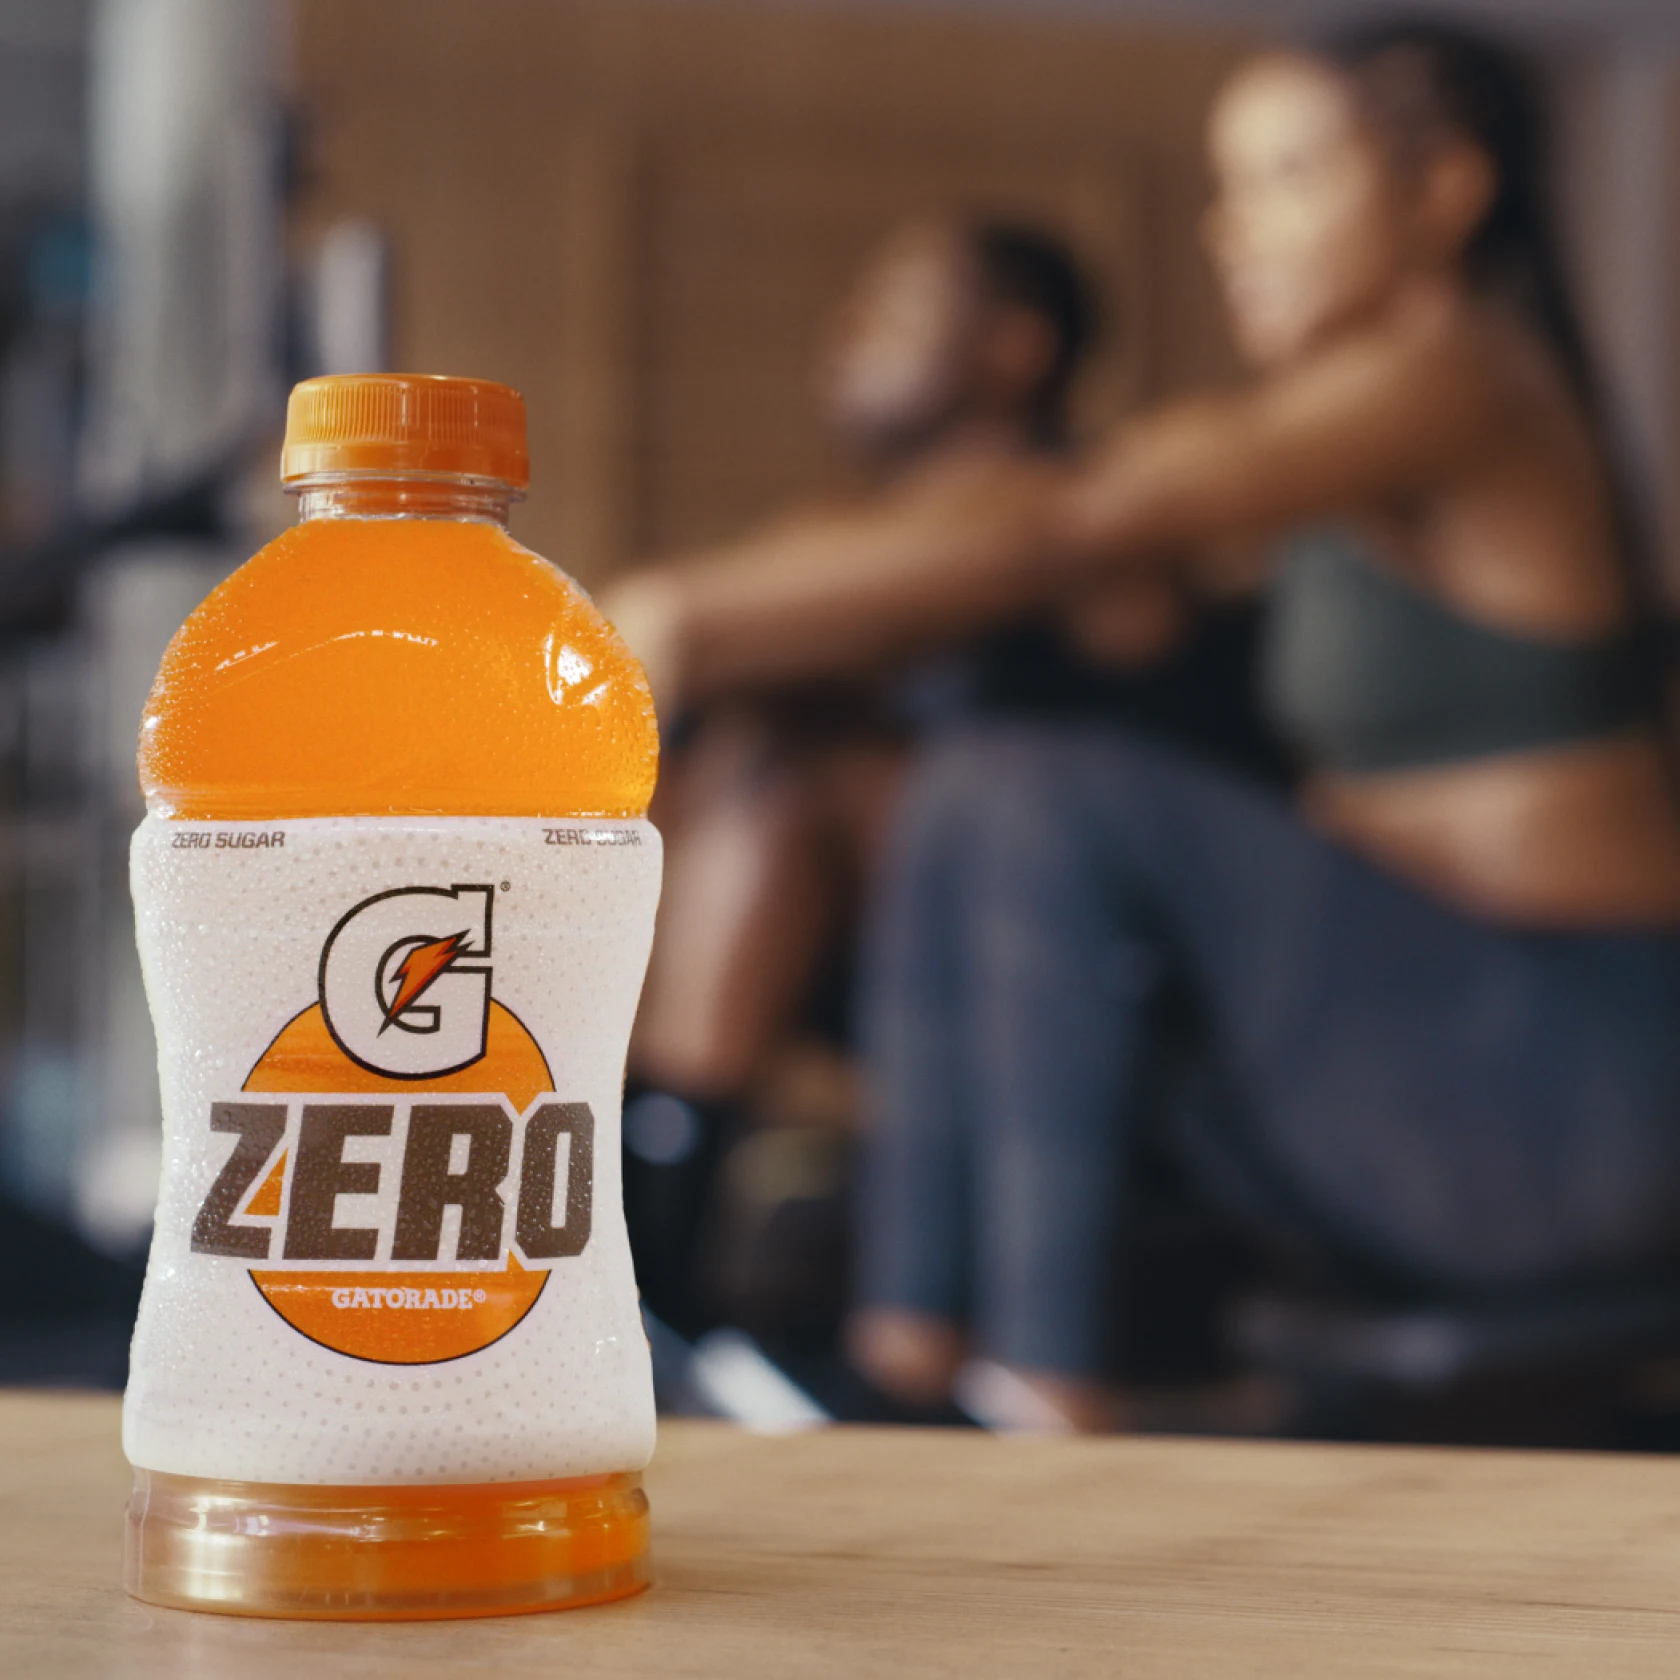 In the forefront, a bottle of orange-flavored Gatorade Zero. In the background, two people in workout clothes on rowing machines.  